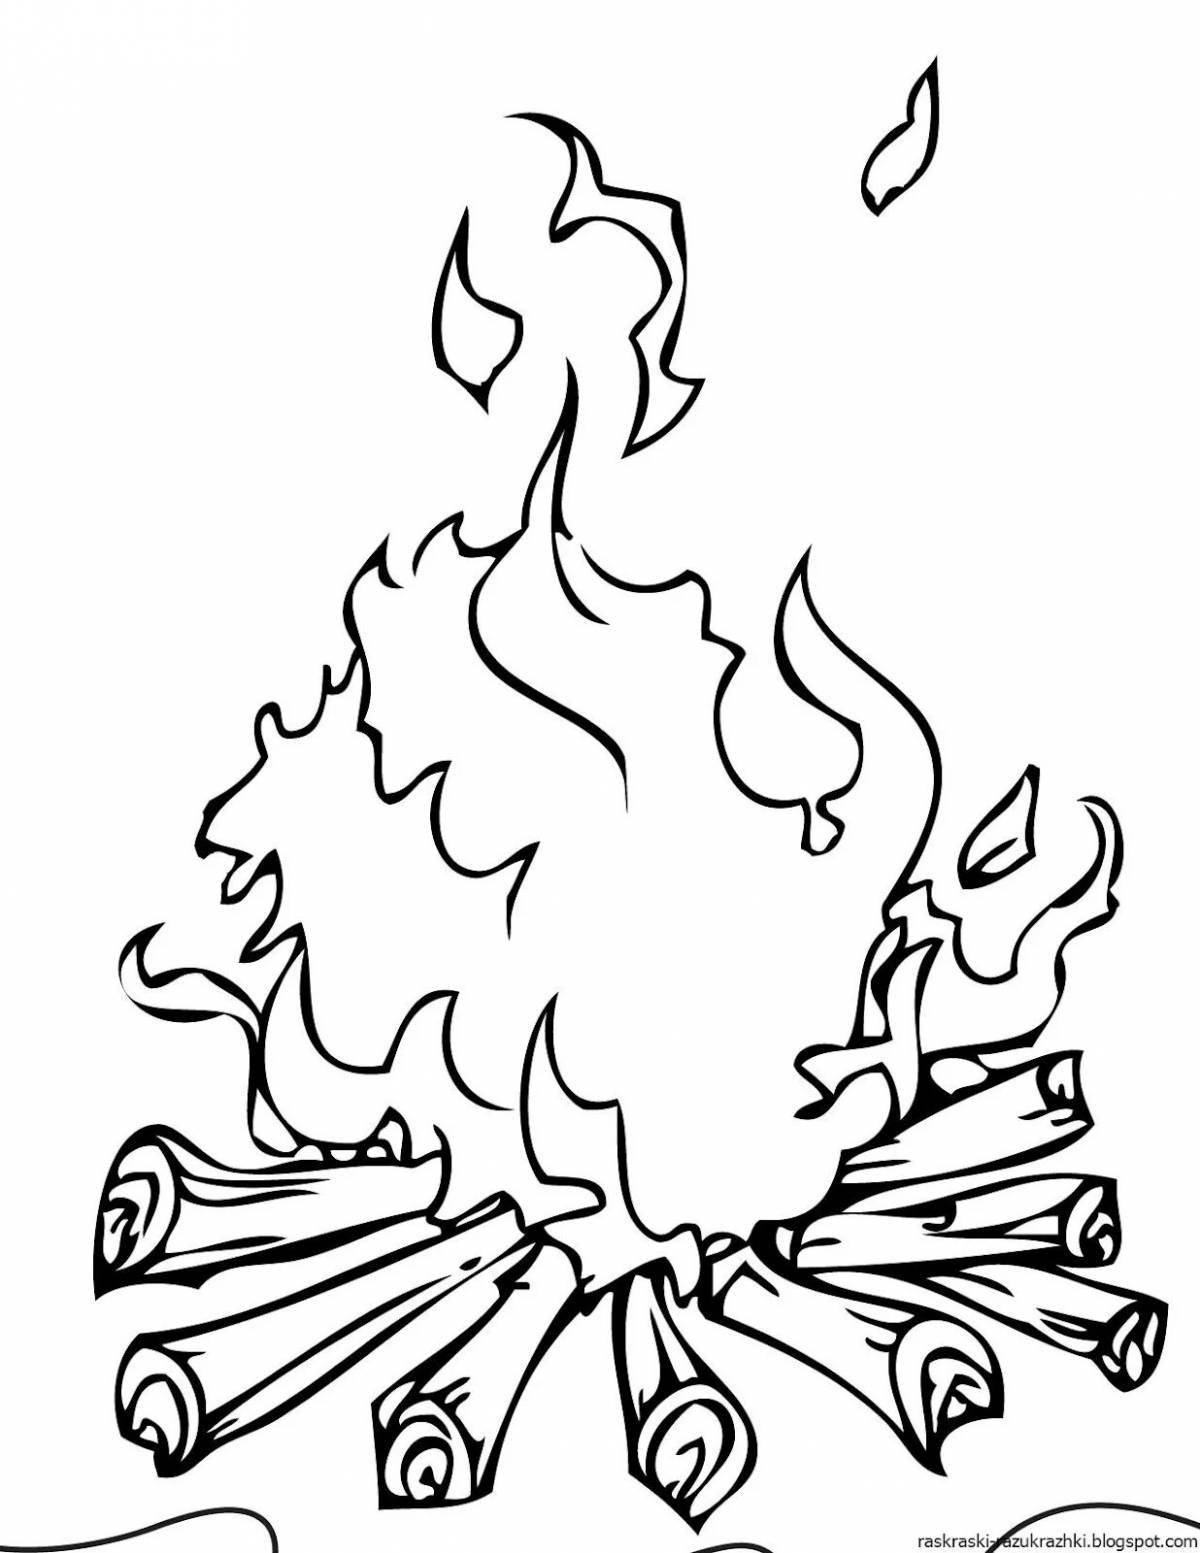 Intense flame coloring page